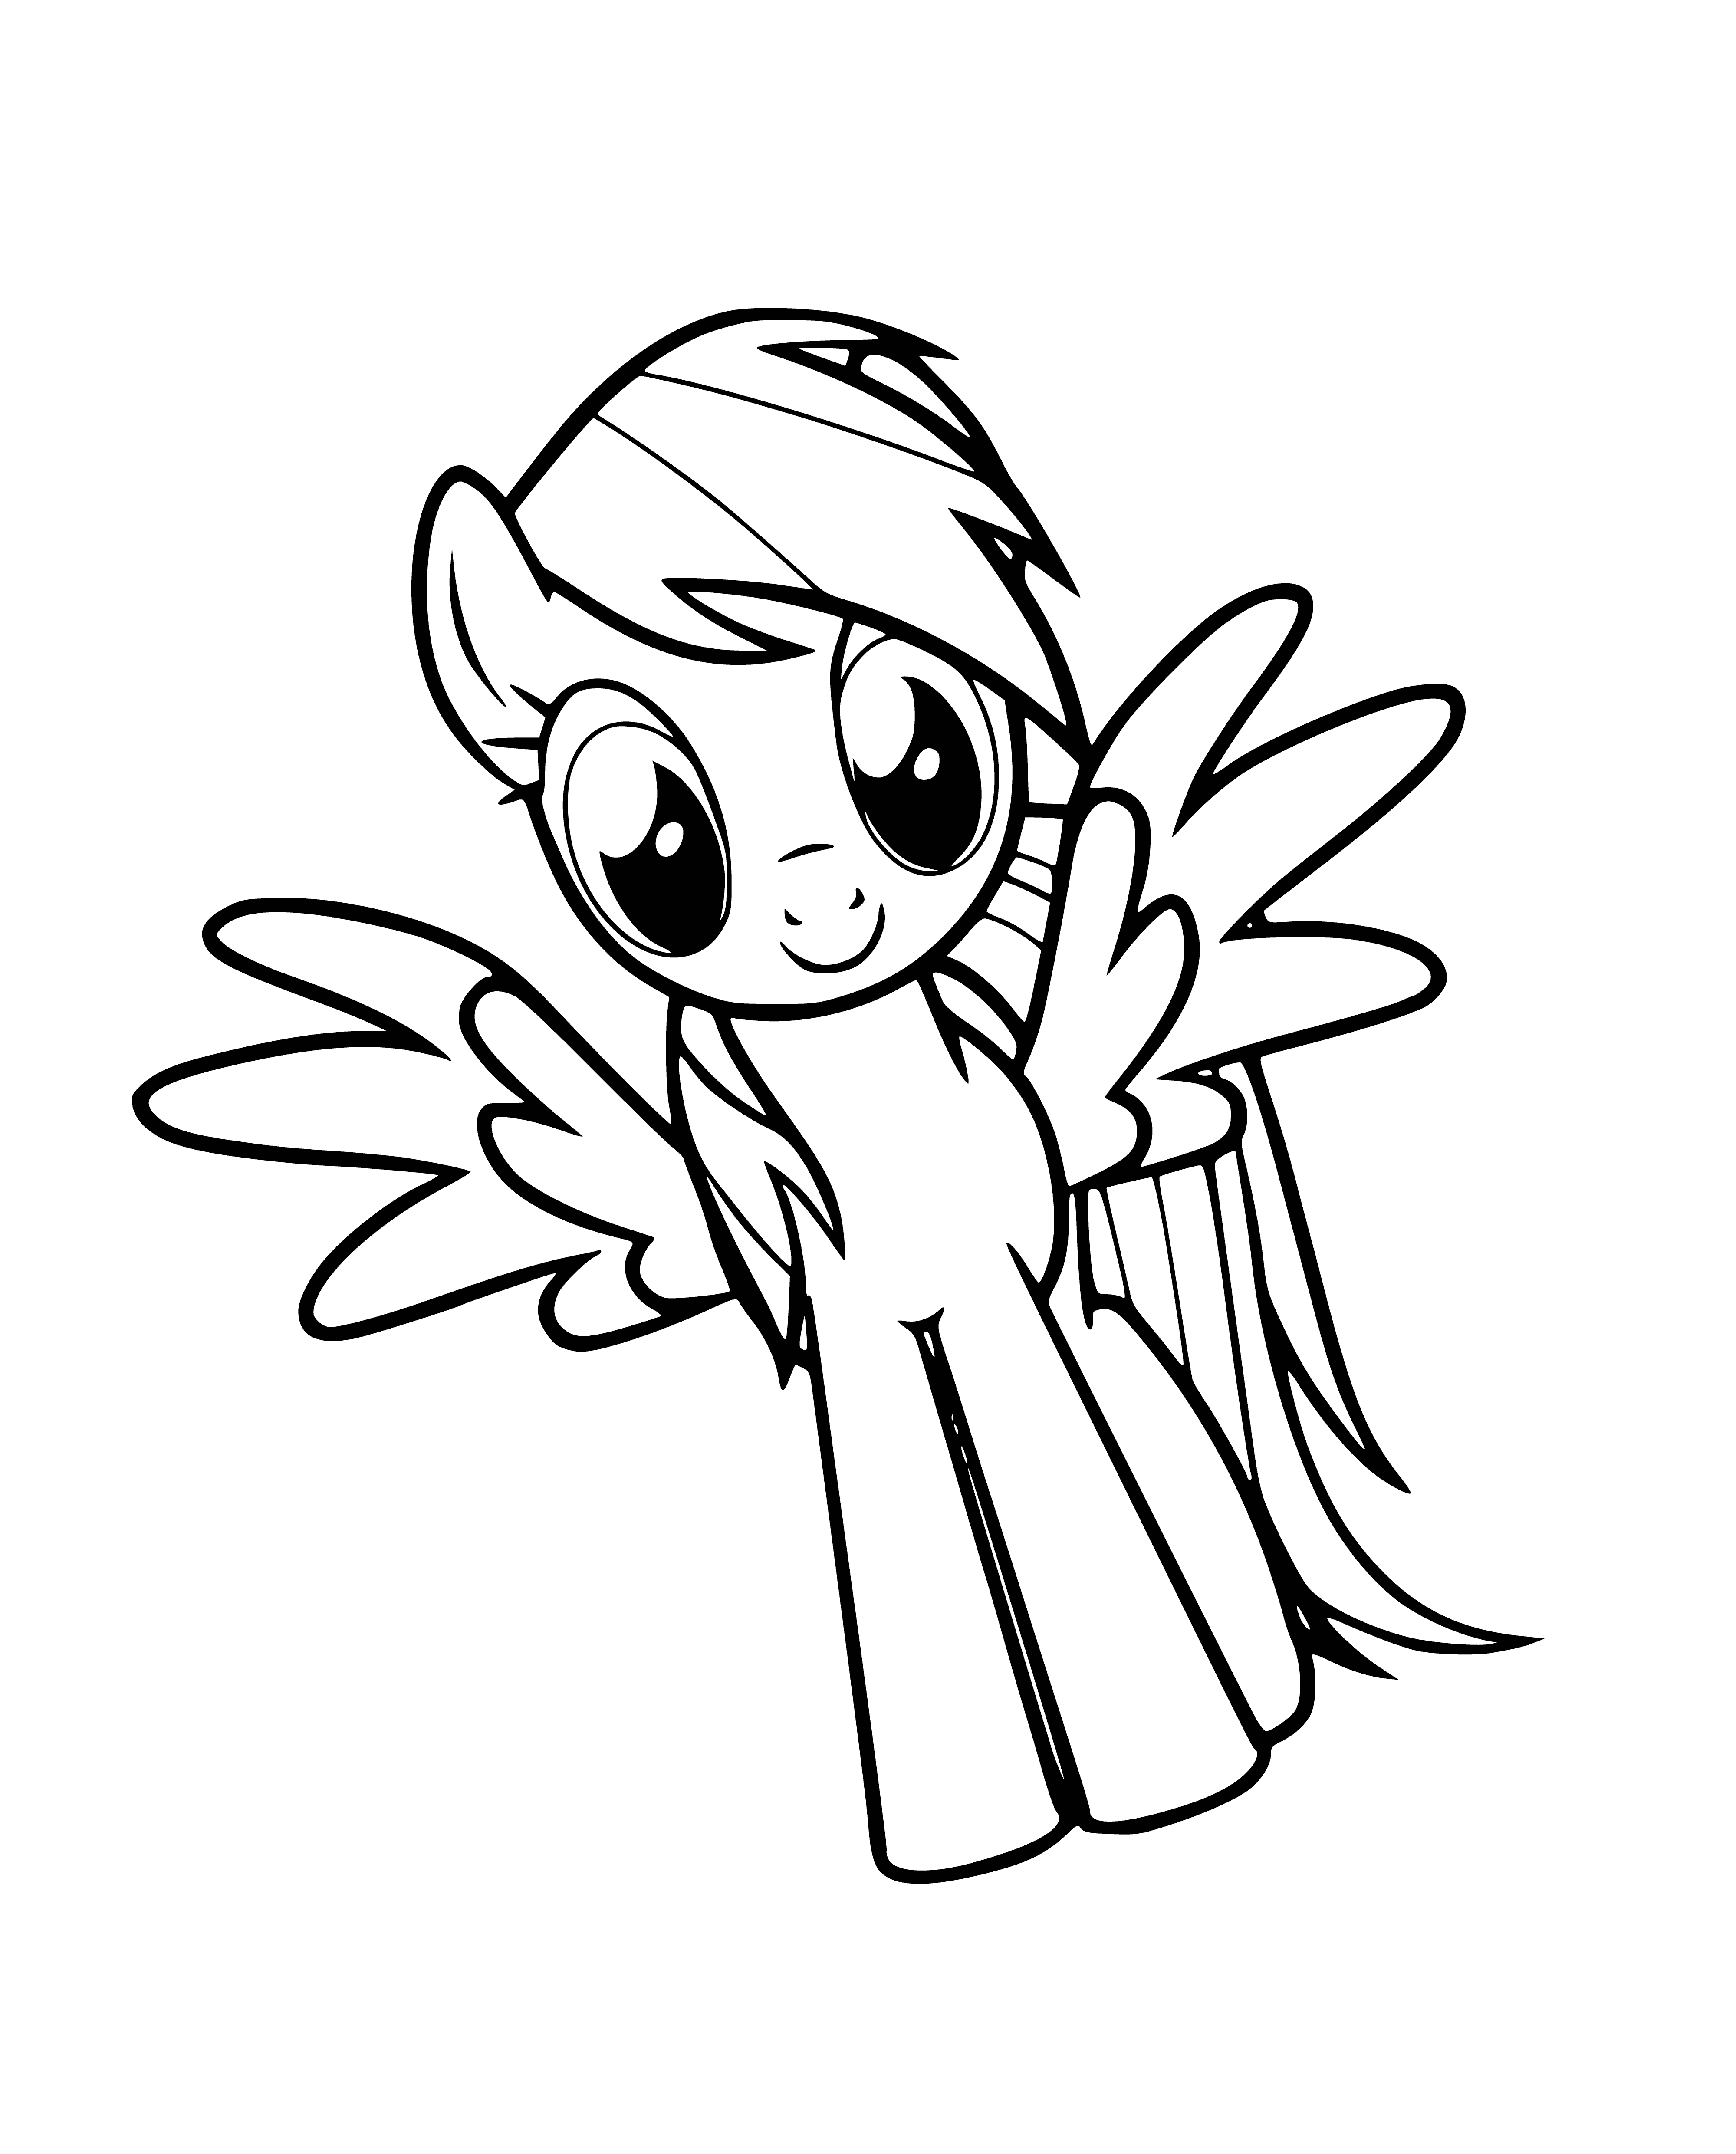 coloring page: Rainbow Dash is a brave, loyal Pegasus in MLP:FIM who loves flying and stands by her friends in Ponyville.